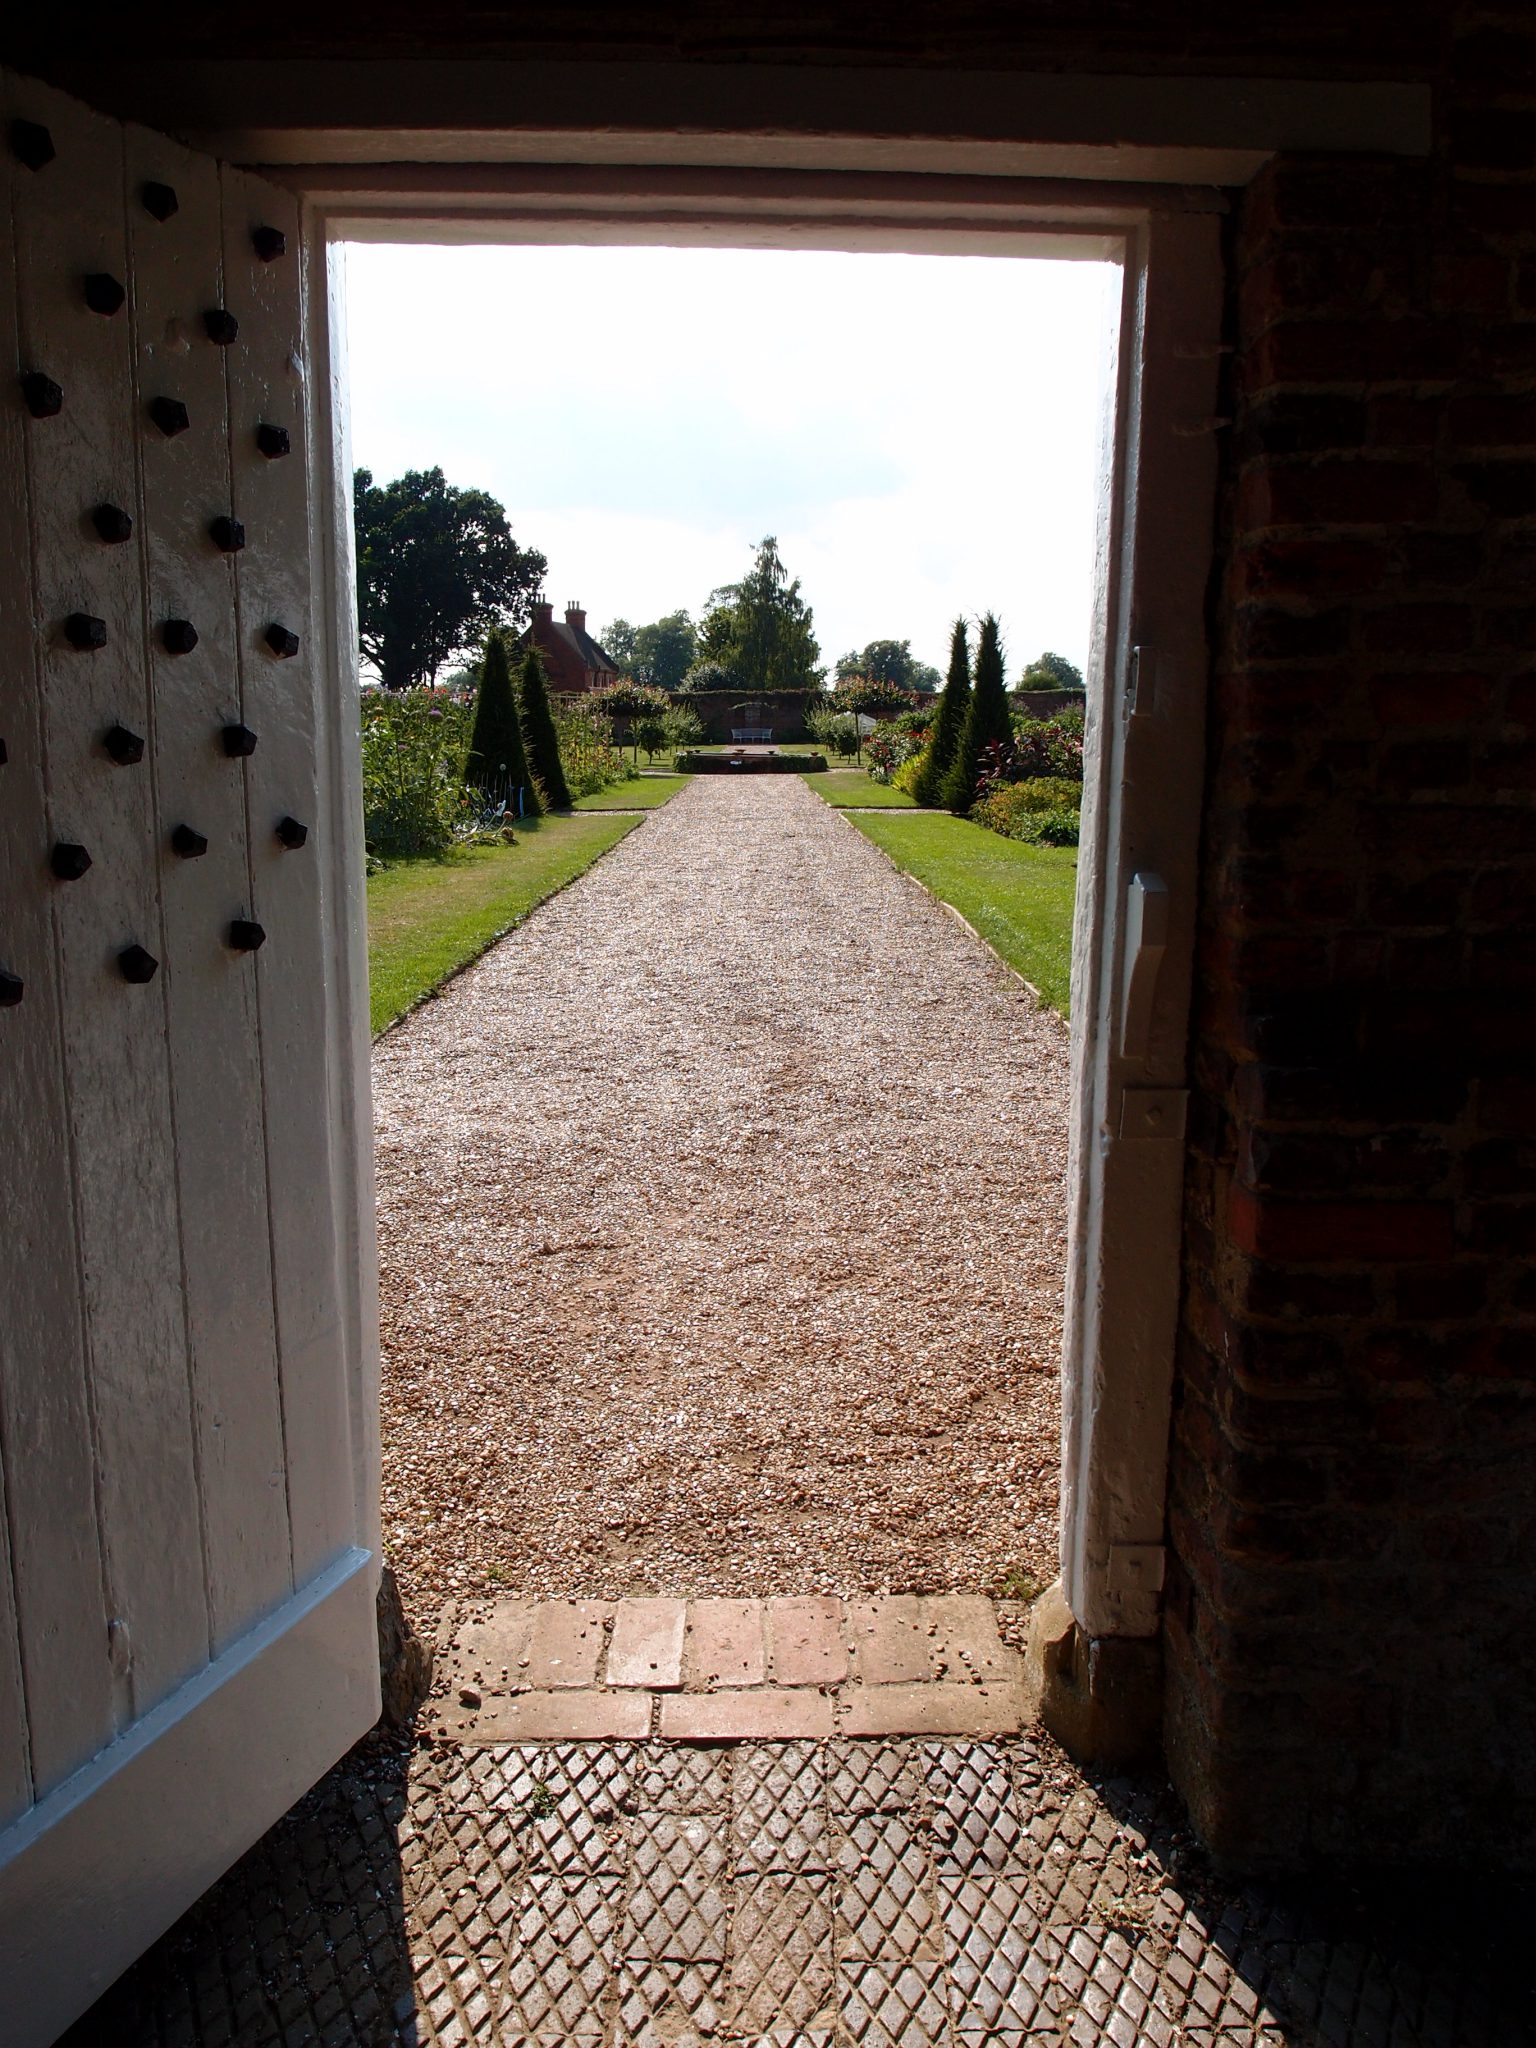 We pass from the Italian Garden, out into the great spaces of the Walled Garden